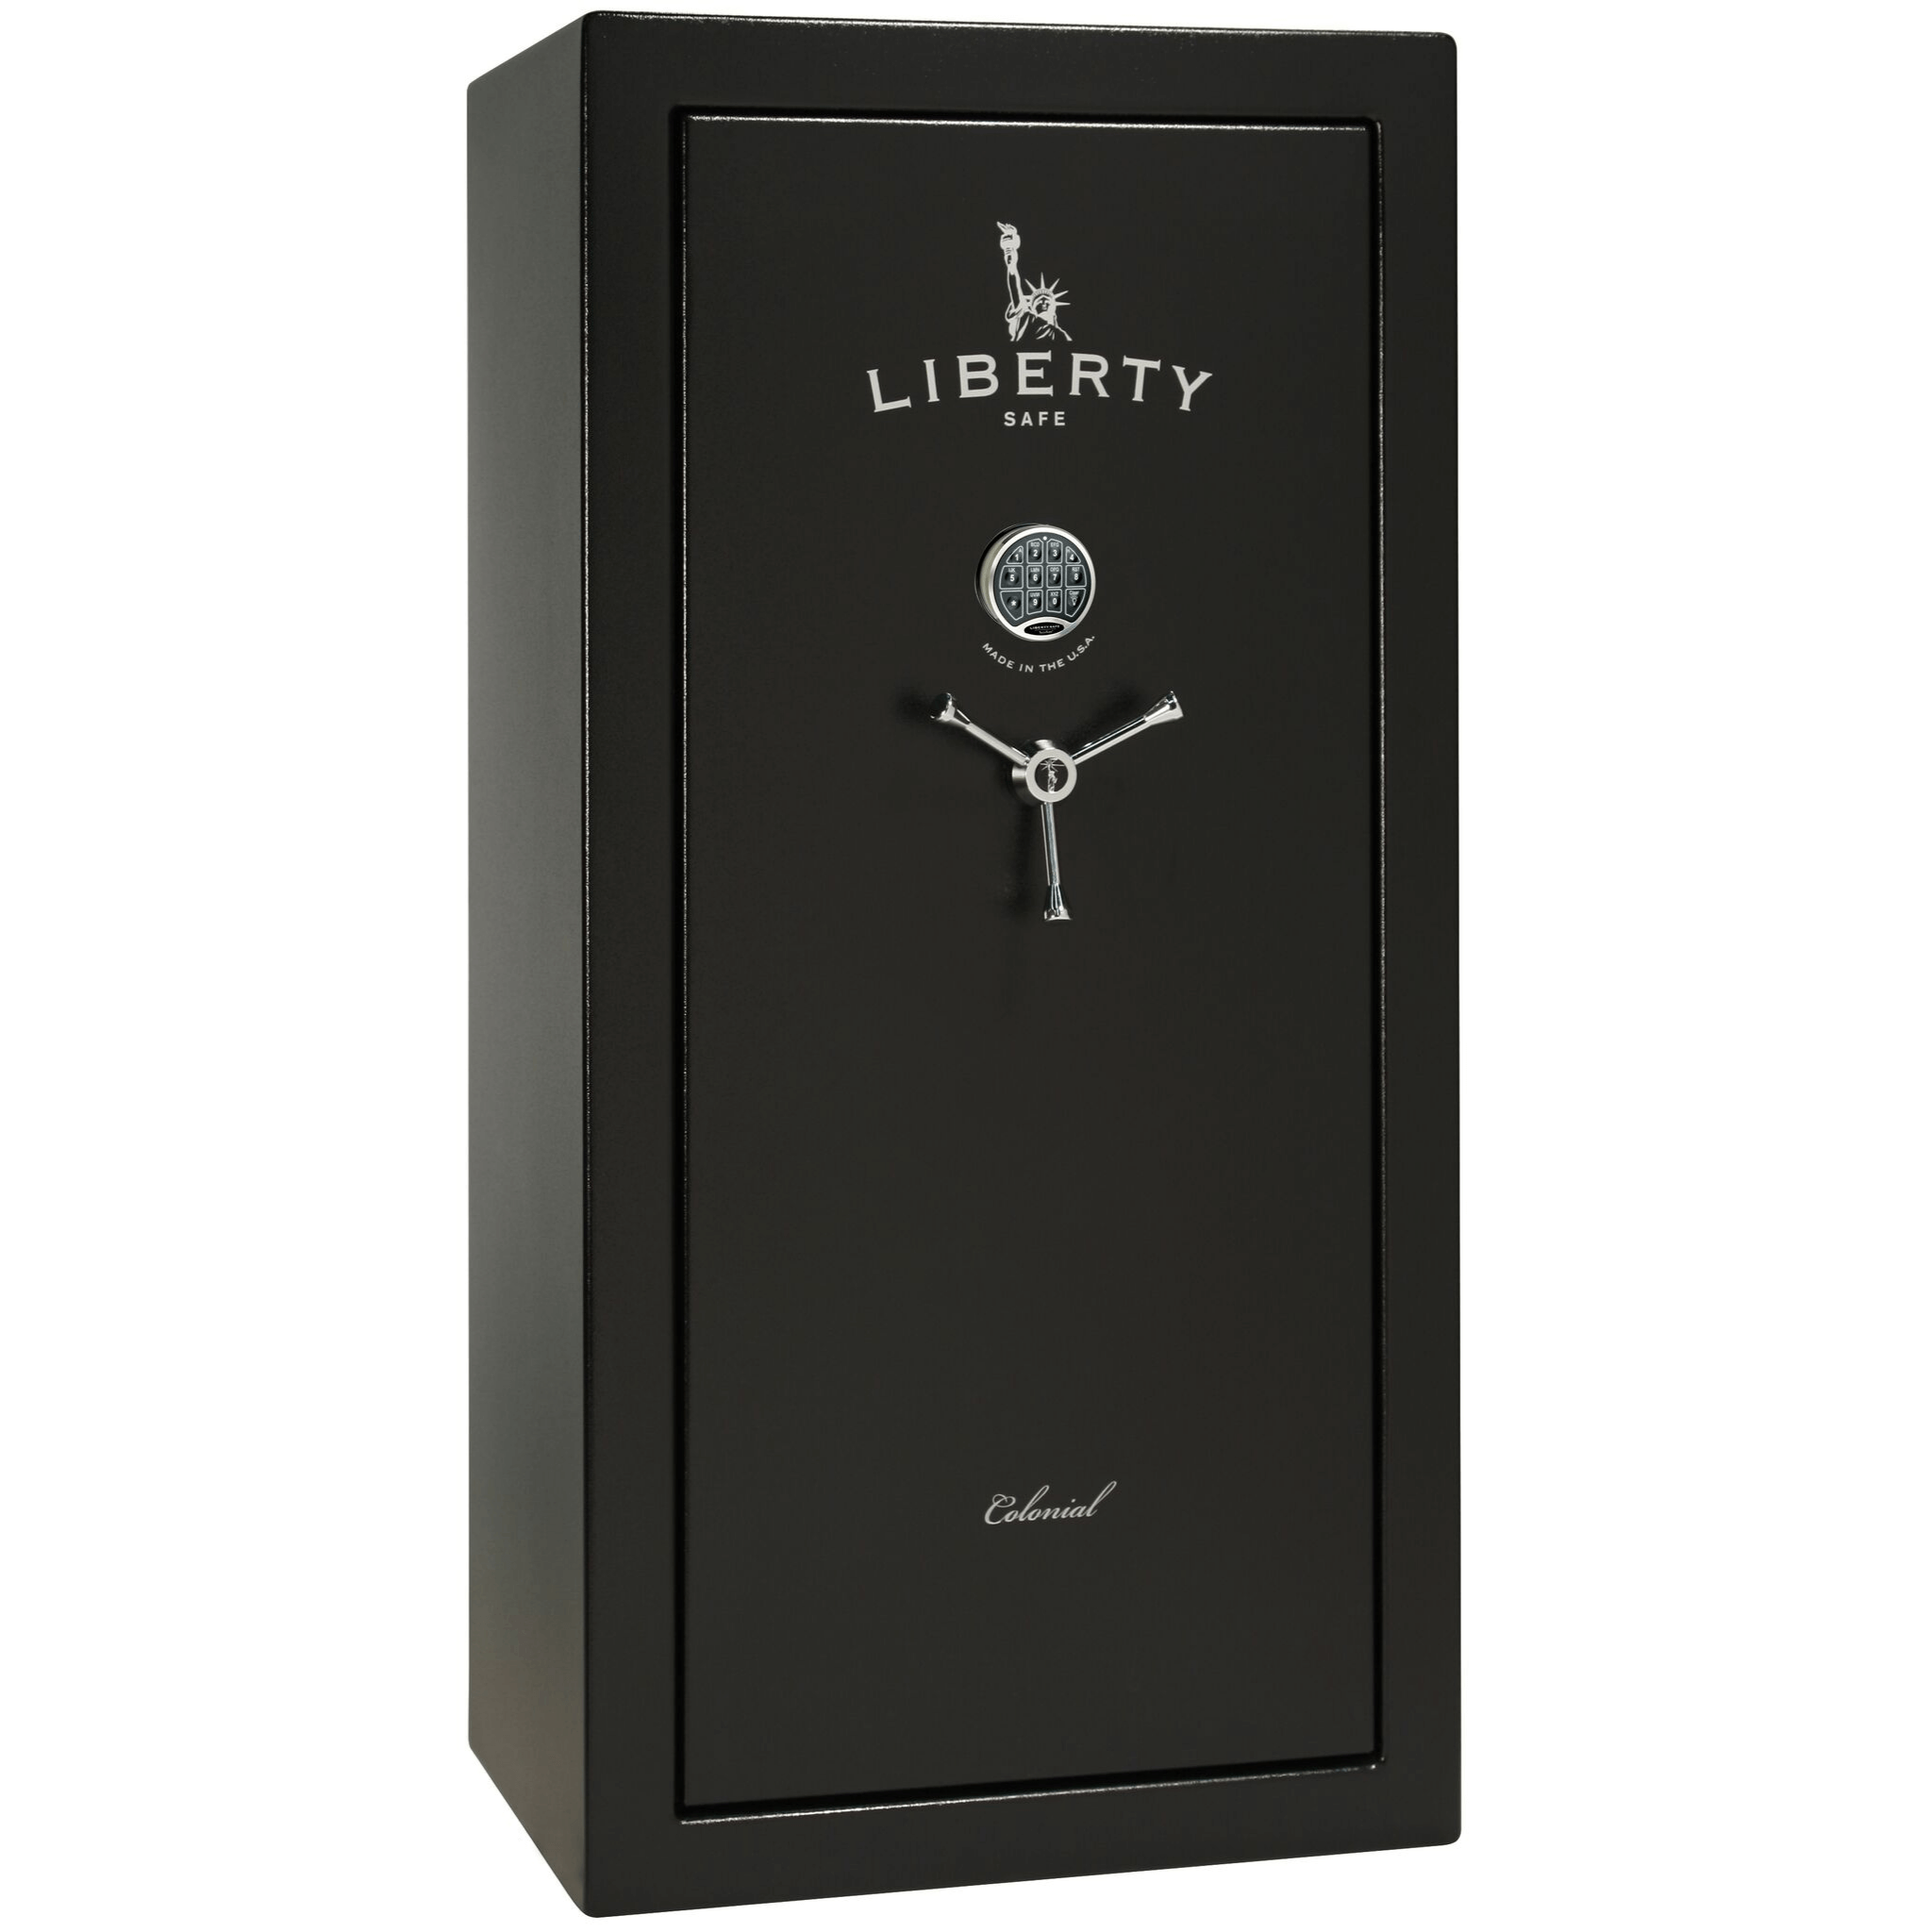 Colonial Series | Level 3 Security | 75 Minute Fire Protection | 23 | DIMENSIONS: 60.5"(H) X 30"(W) X 25"(D) | Black Textured | Electronic Lock, photo 11